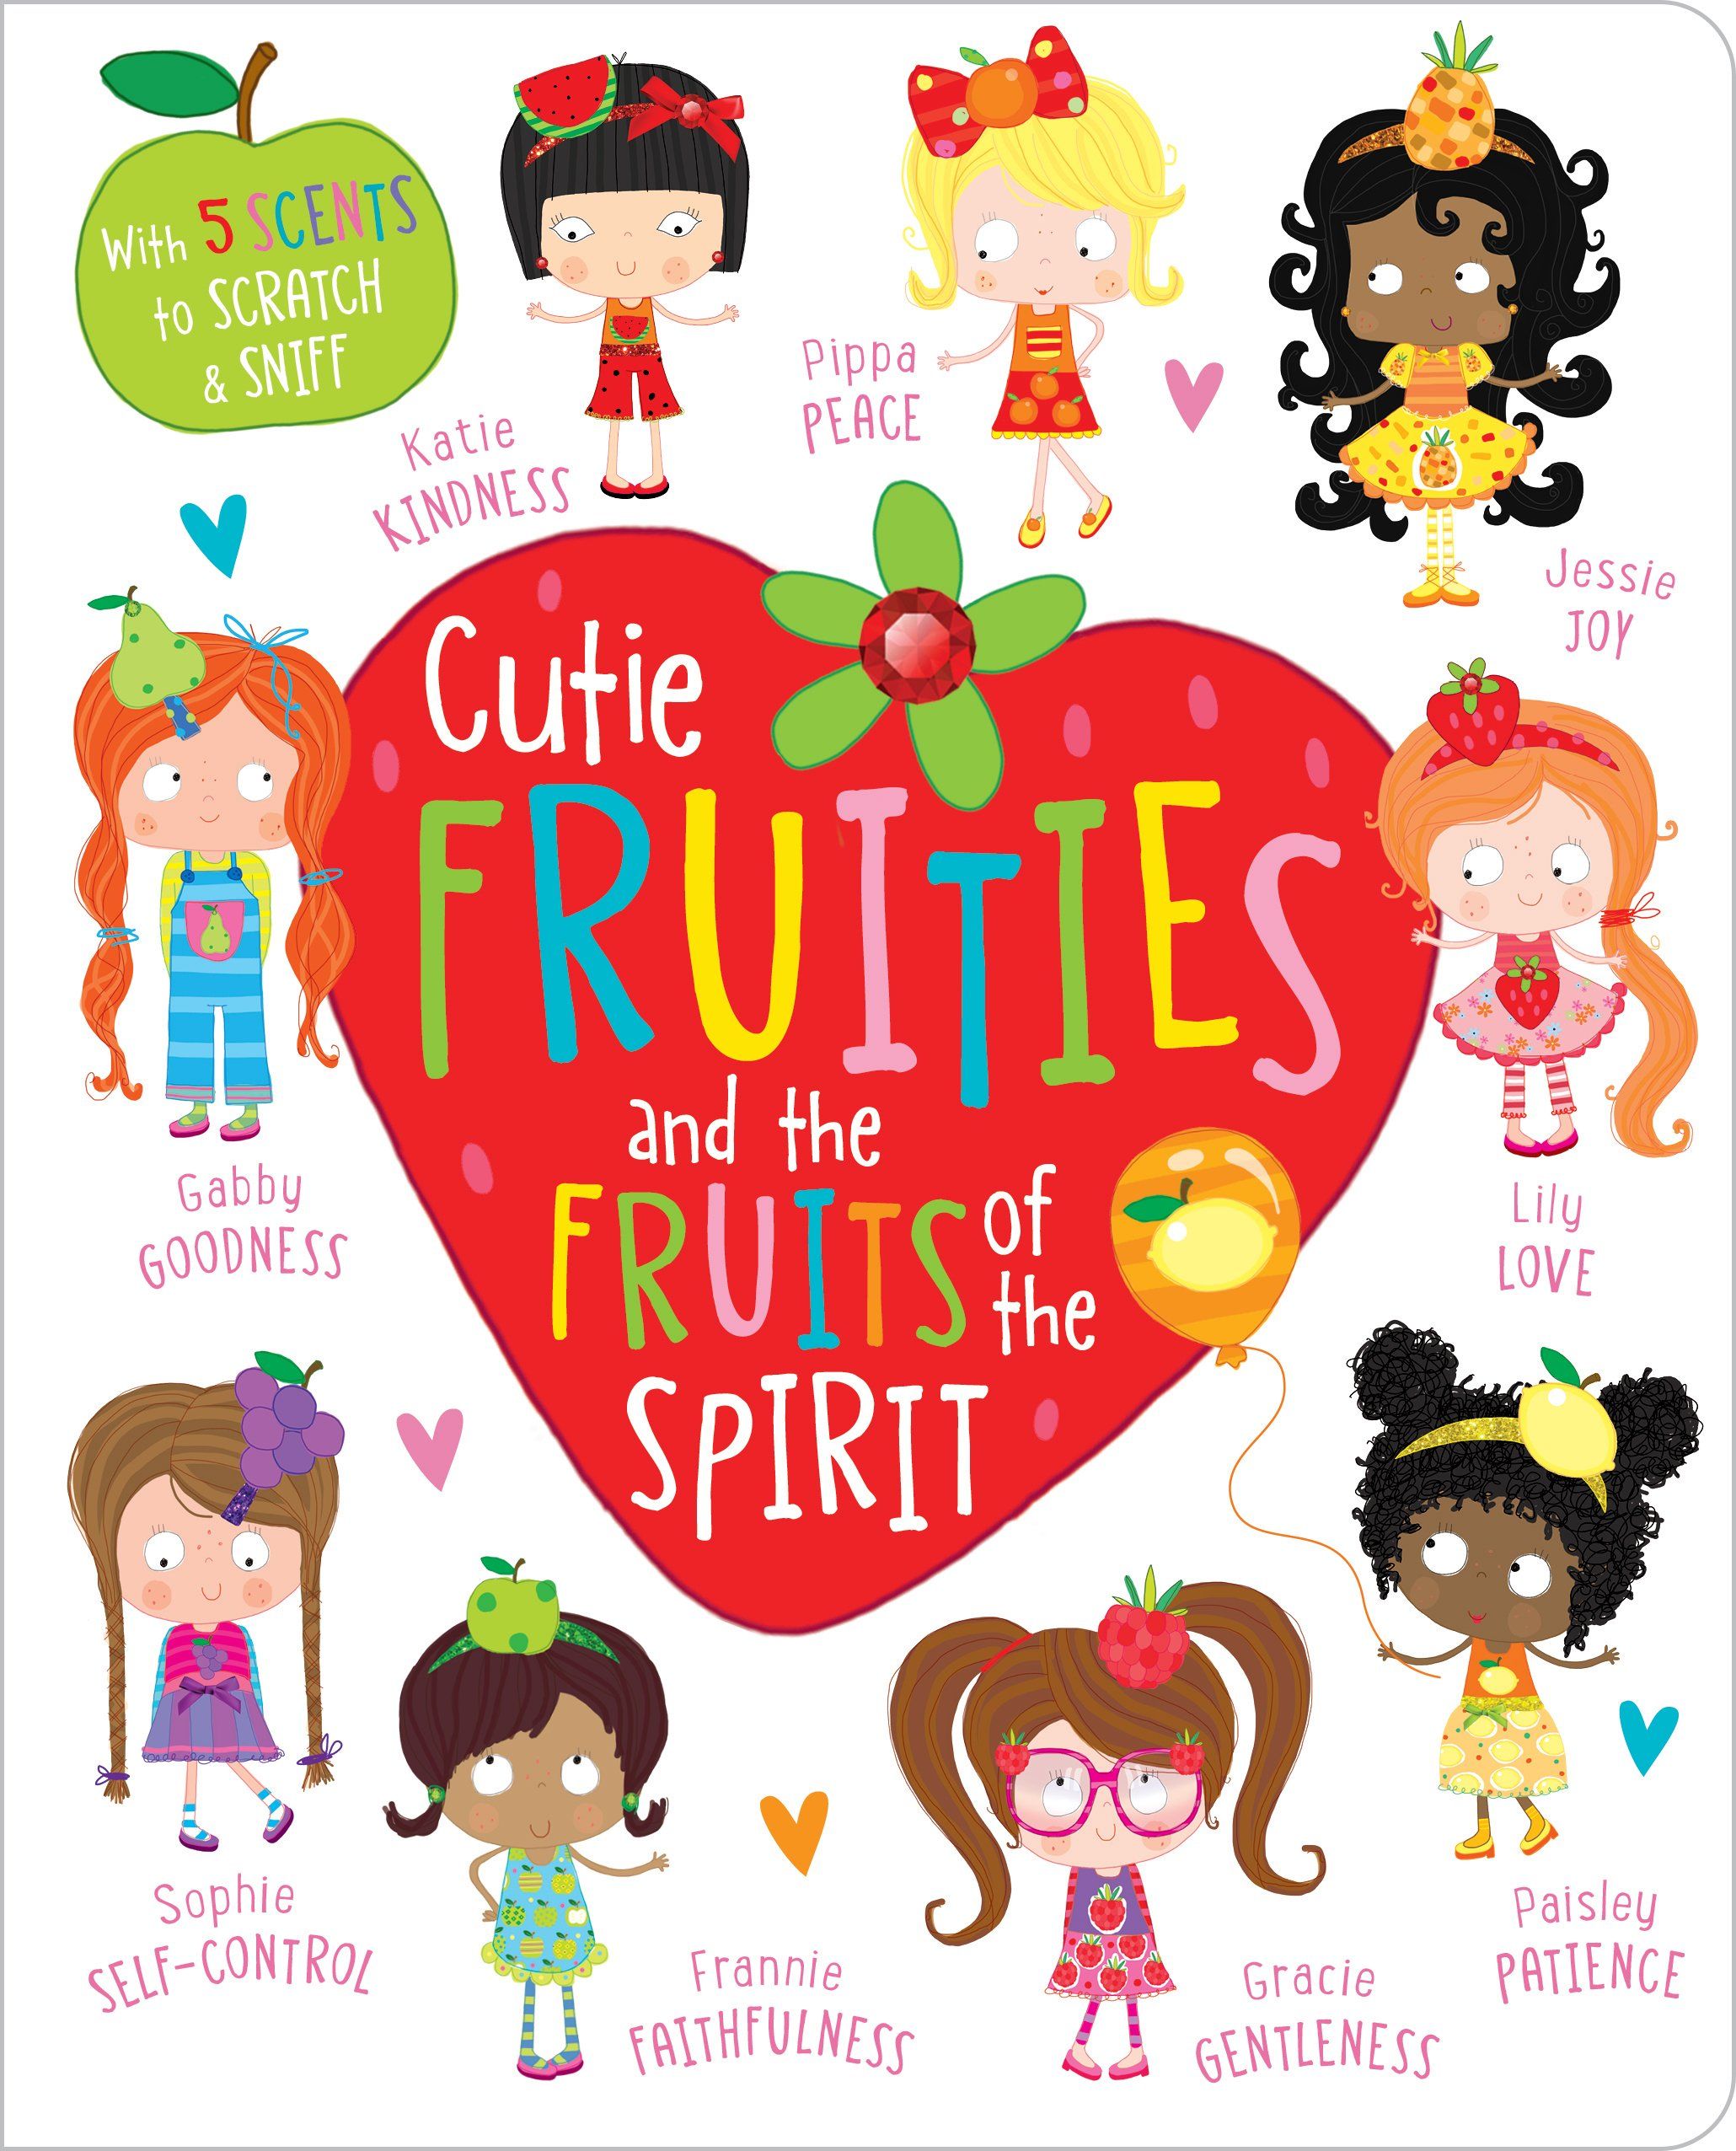 Cover of the cutie fruities book